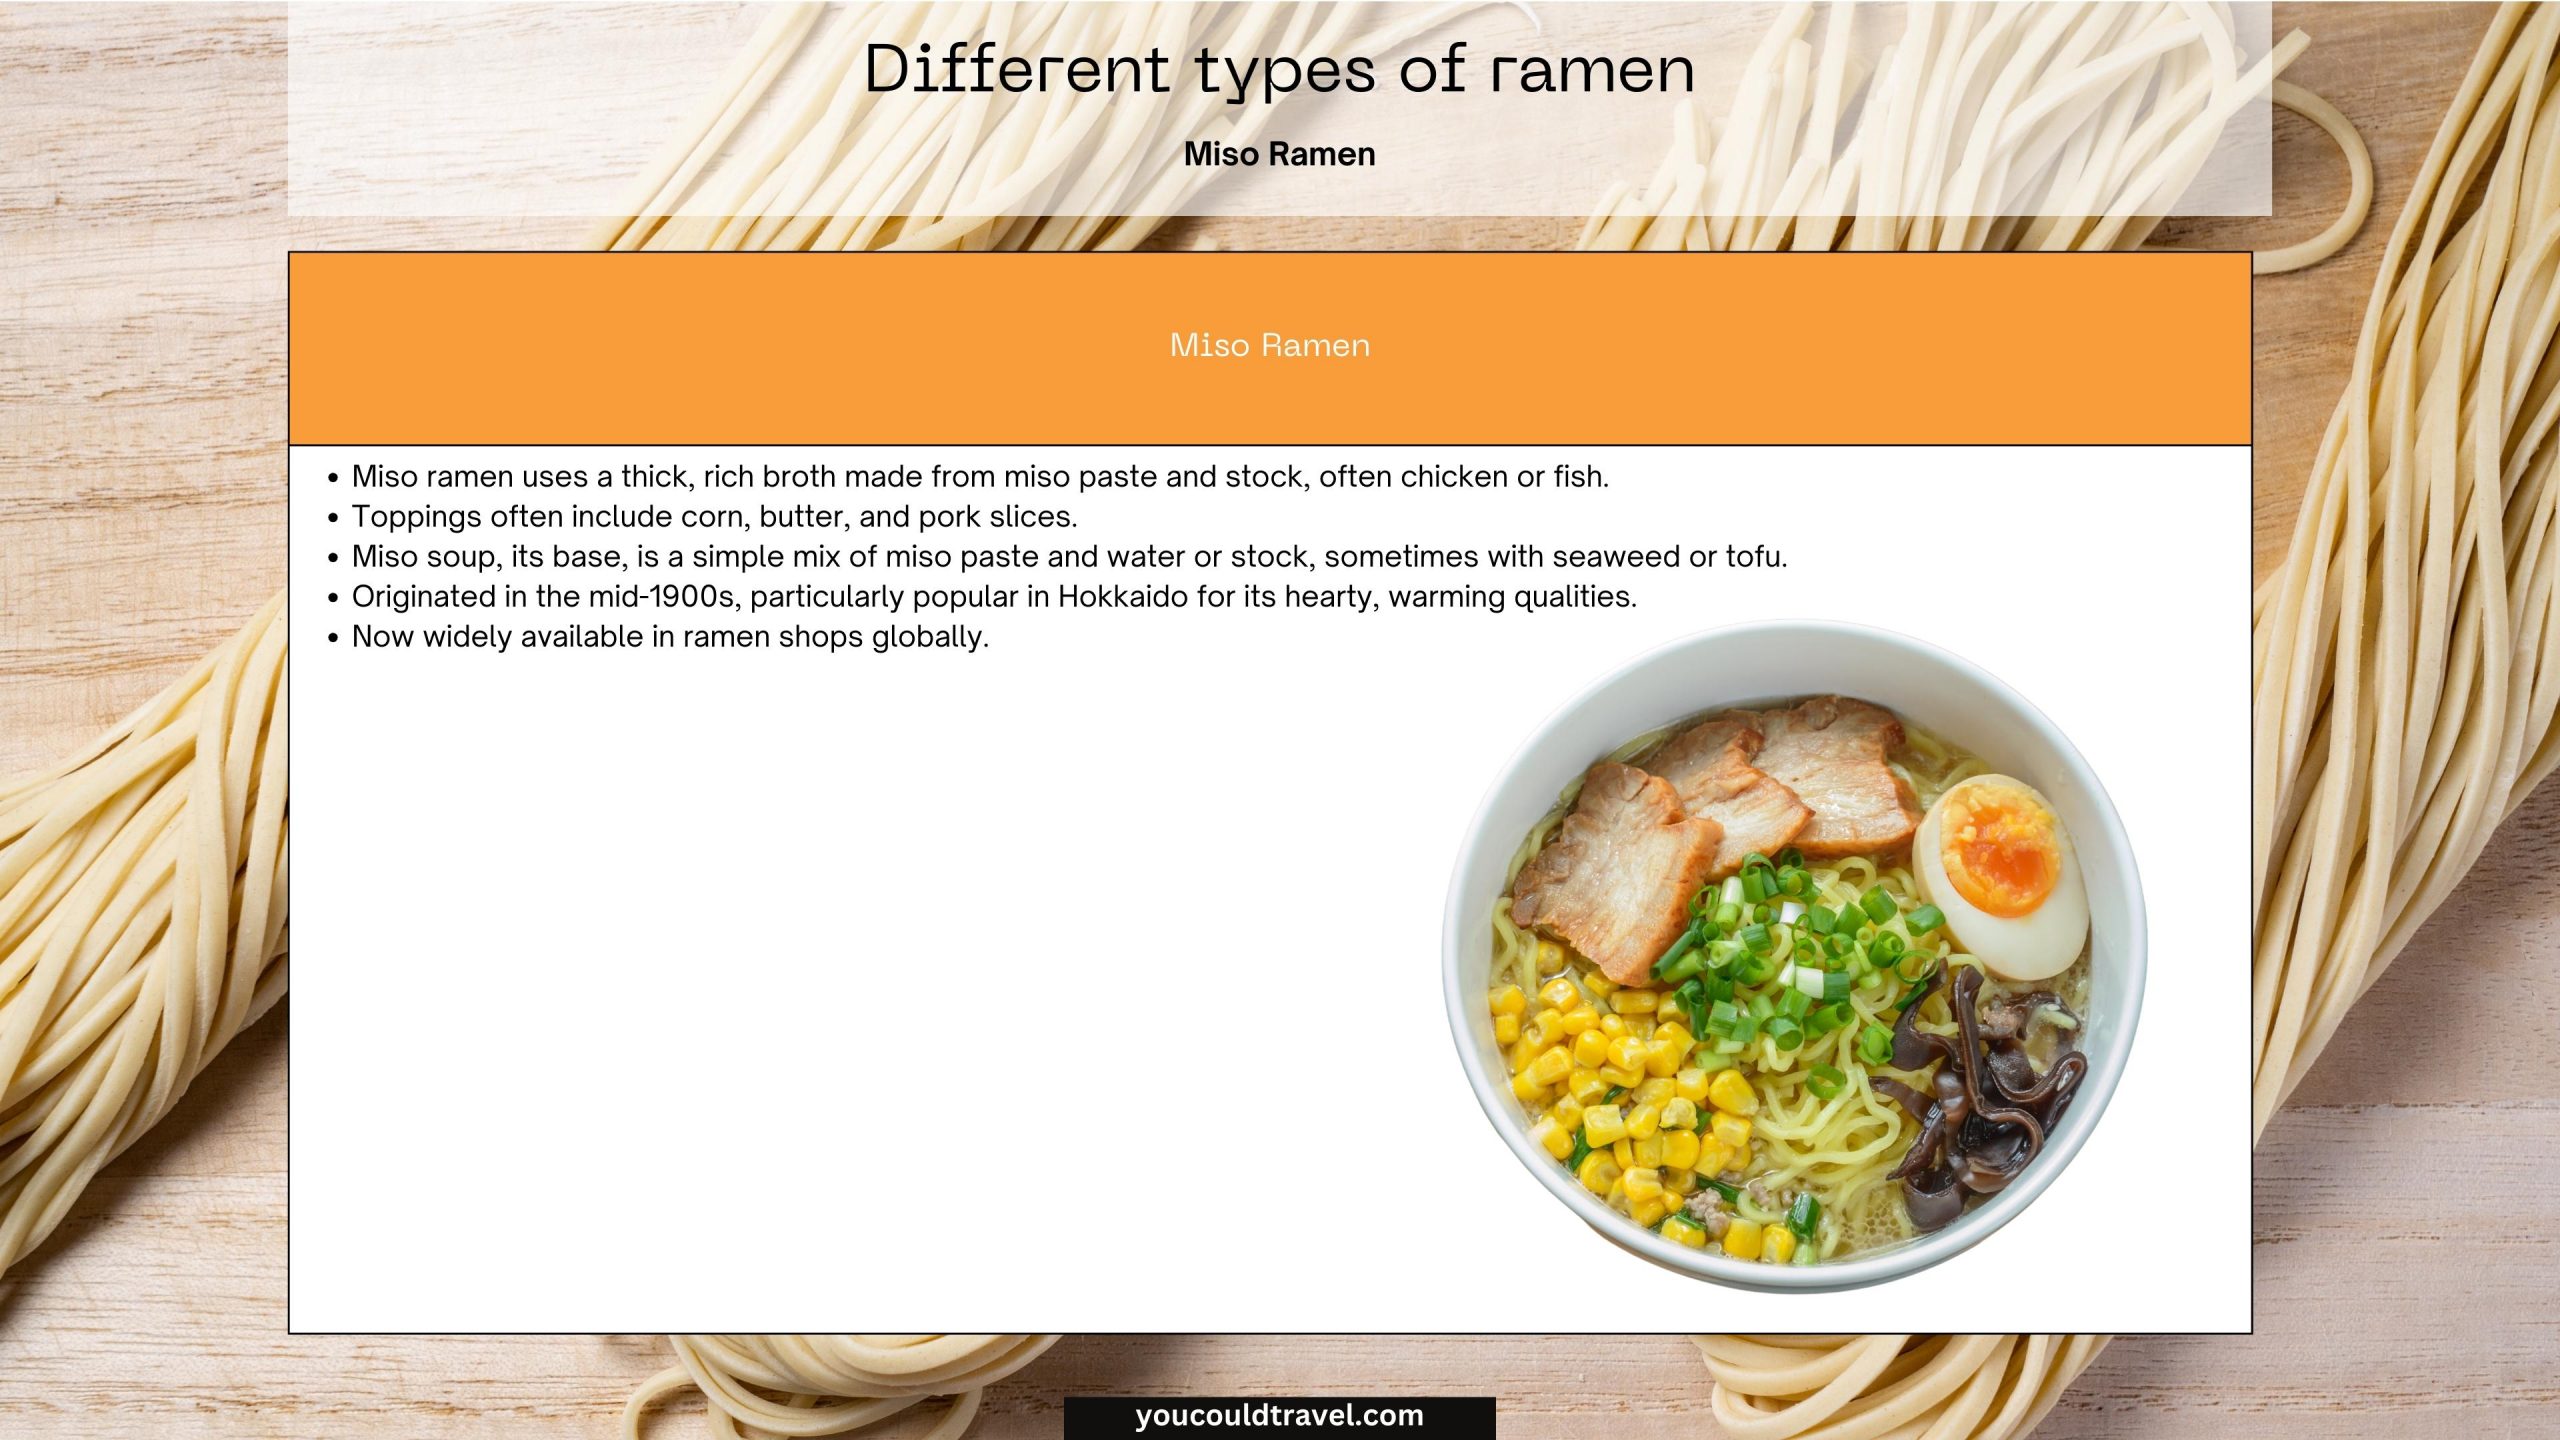 Miso ramen explanation and picture